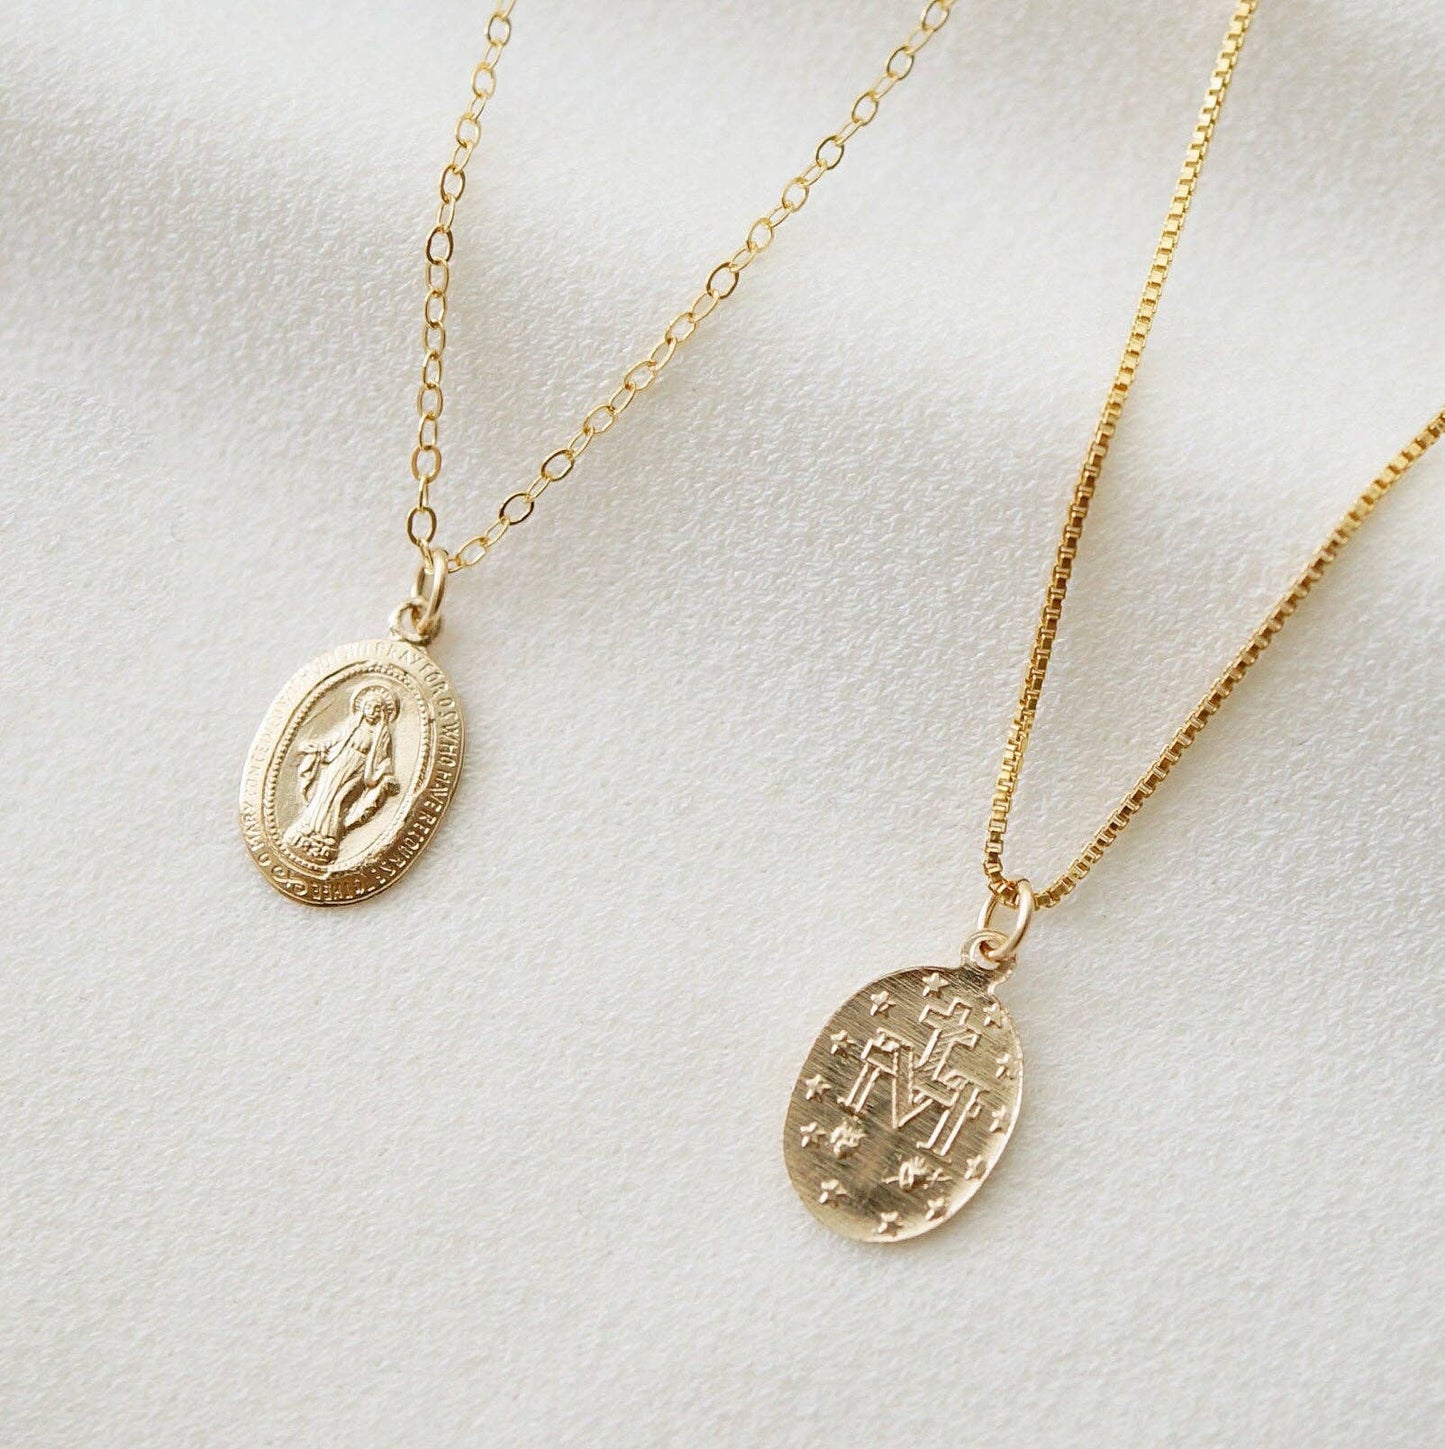 Blessed Mother Mary 14K Gold fill Necklace